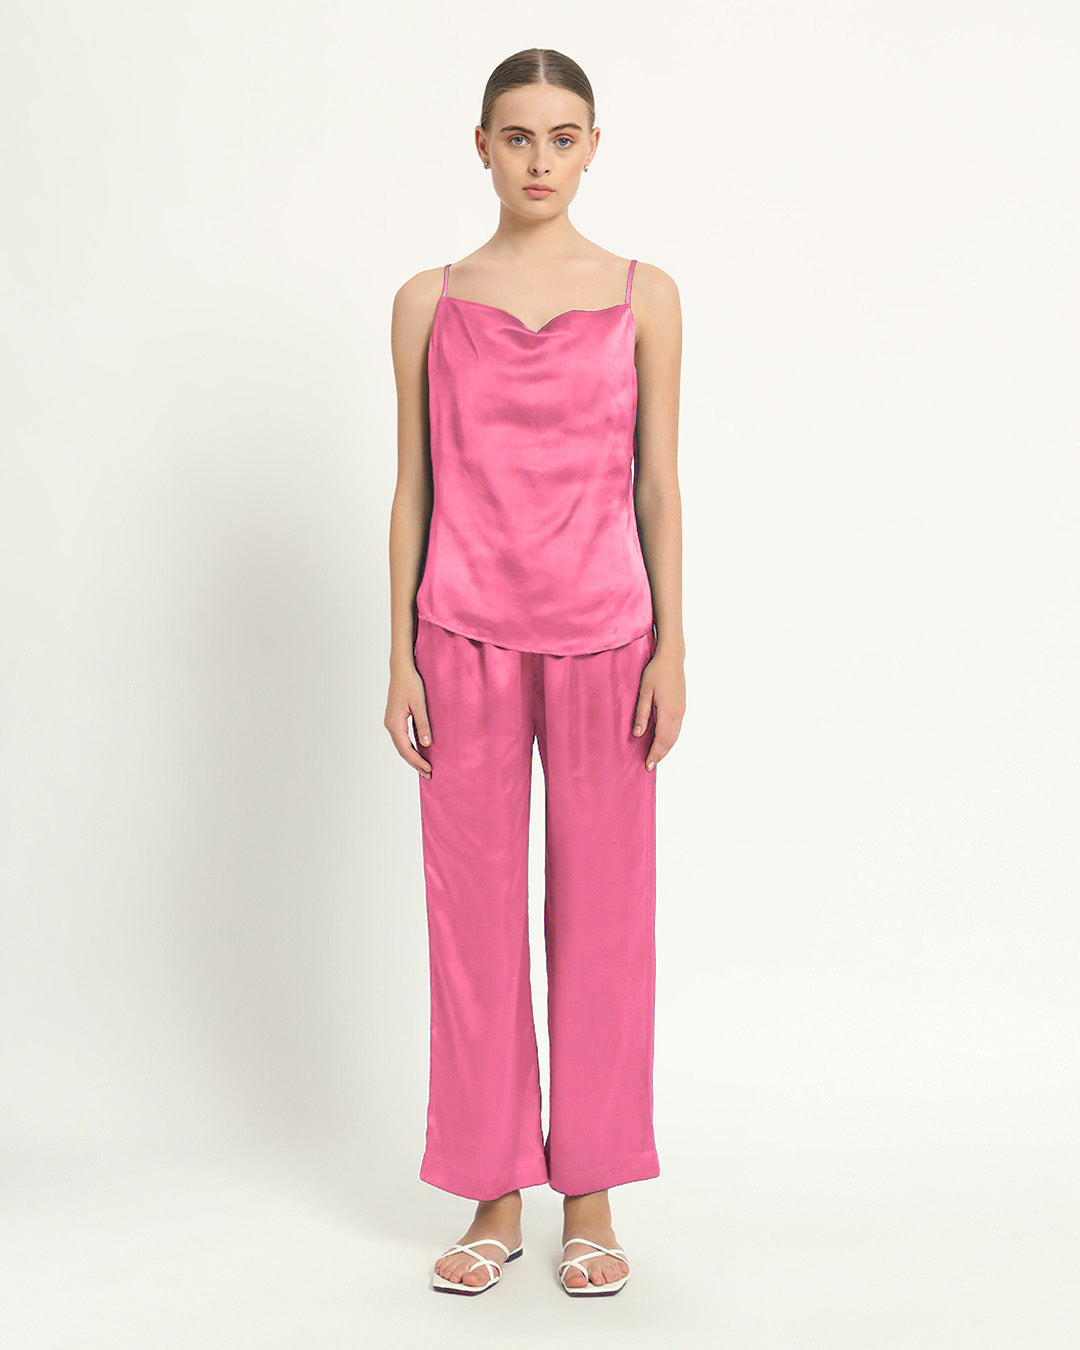 Satin Cowled Camisole French Rose PJ Set